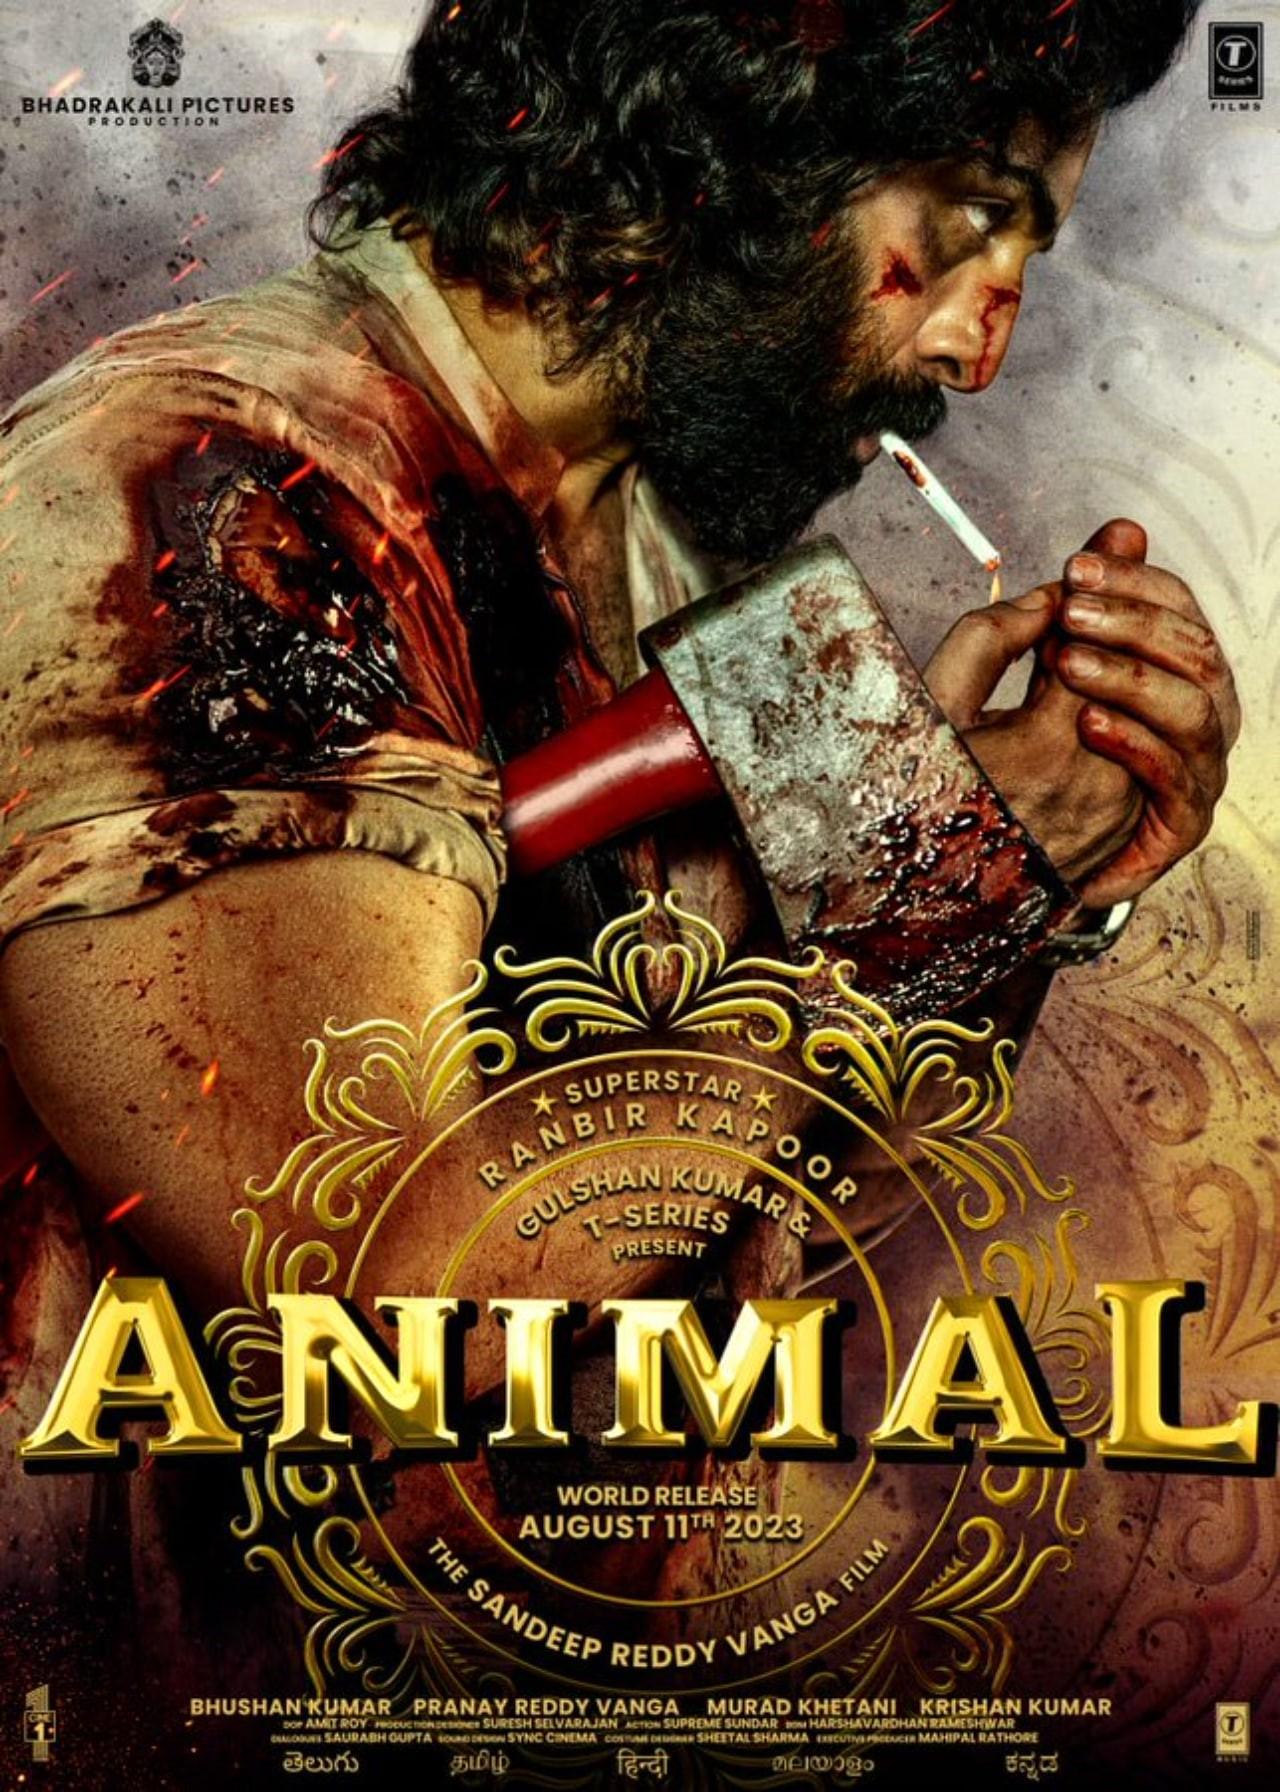 Animal (August 11, 2023)
After the success of 'Tu Jhotthi Mein Makkar,' Ranbir Kapoor is all set for his upcoming action film, 'Animal,' directed by Sandeep Reddy Vanga, the director of 'Kabir Singh.' The film also stars Anil Kapoor, Bobby Deol, Rashmika Mandanna, and Tripti Dimri. 'Animal' is scheduled for release on August 11, 2023.